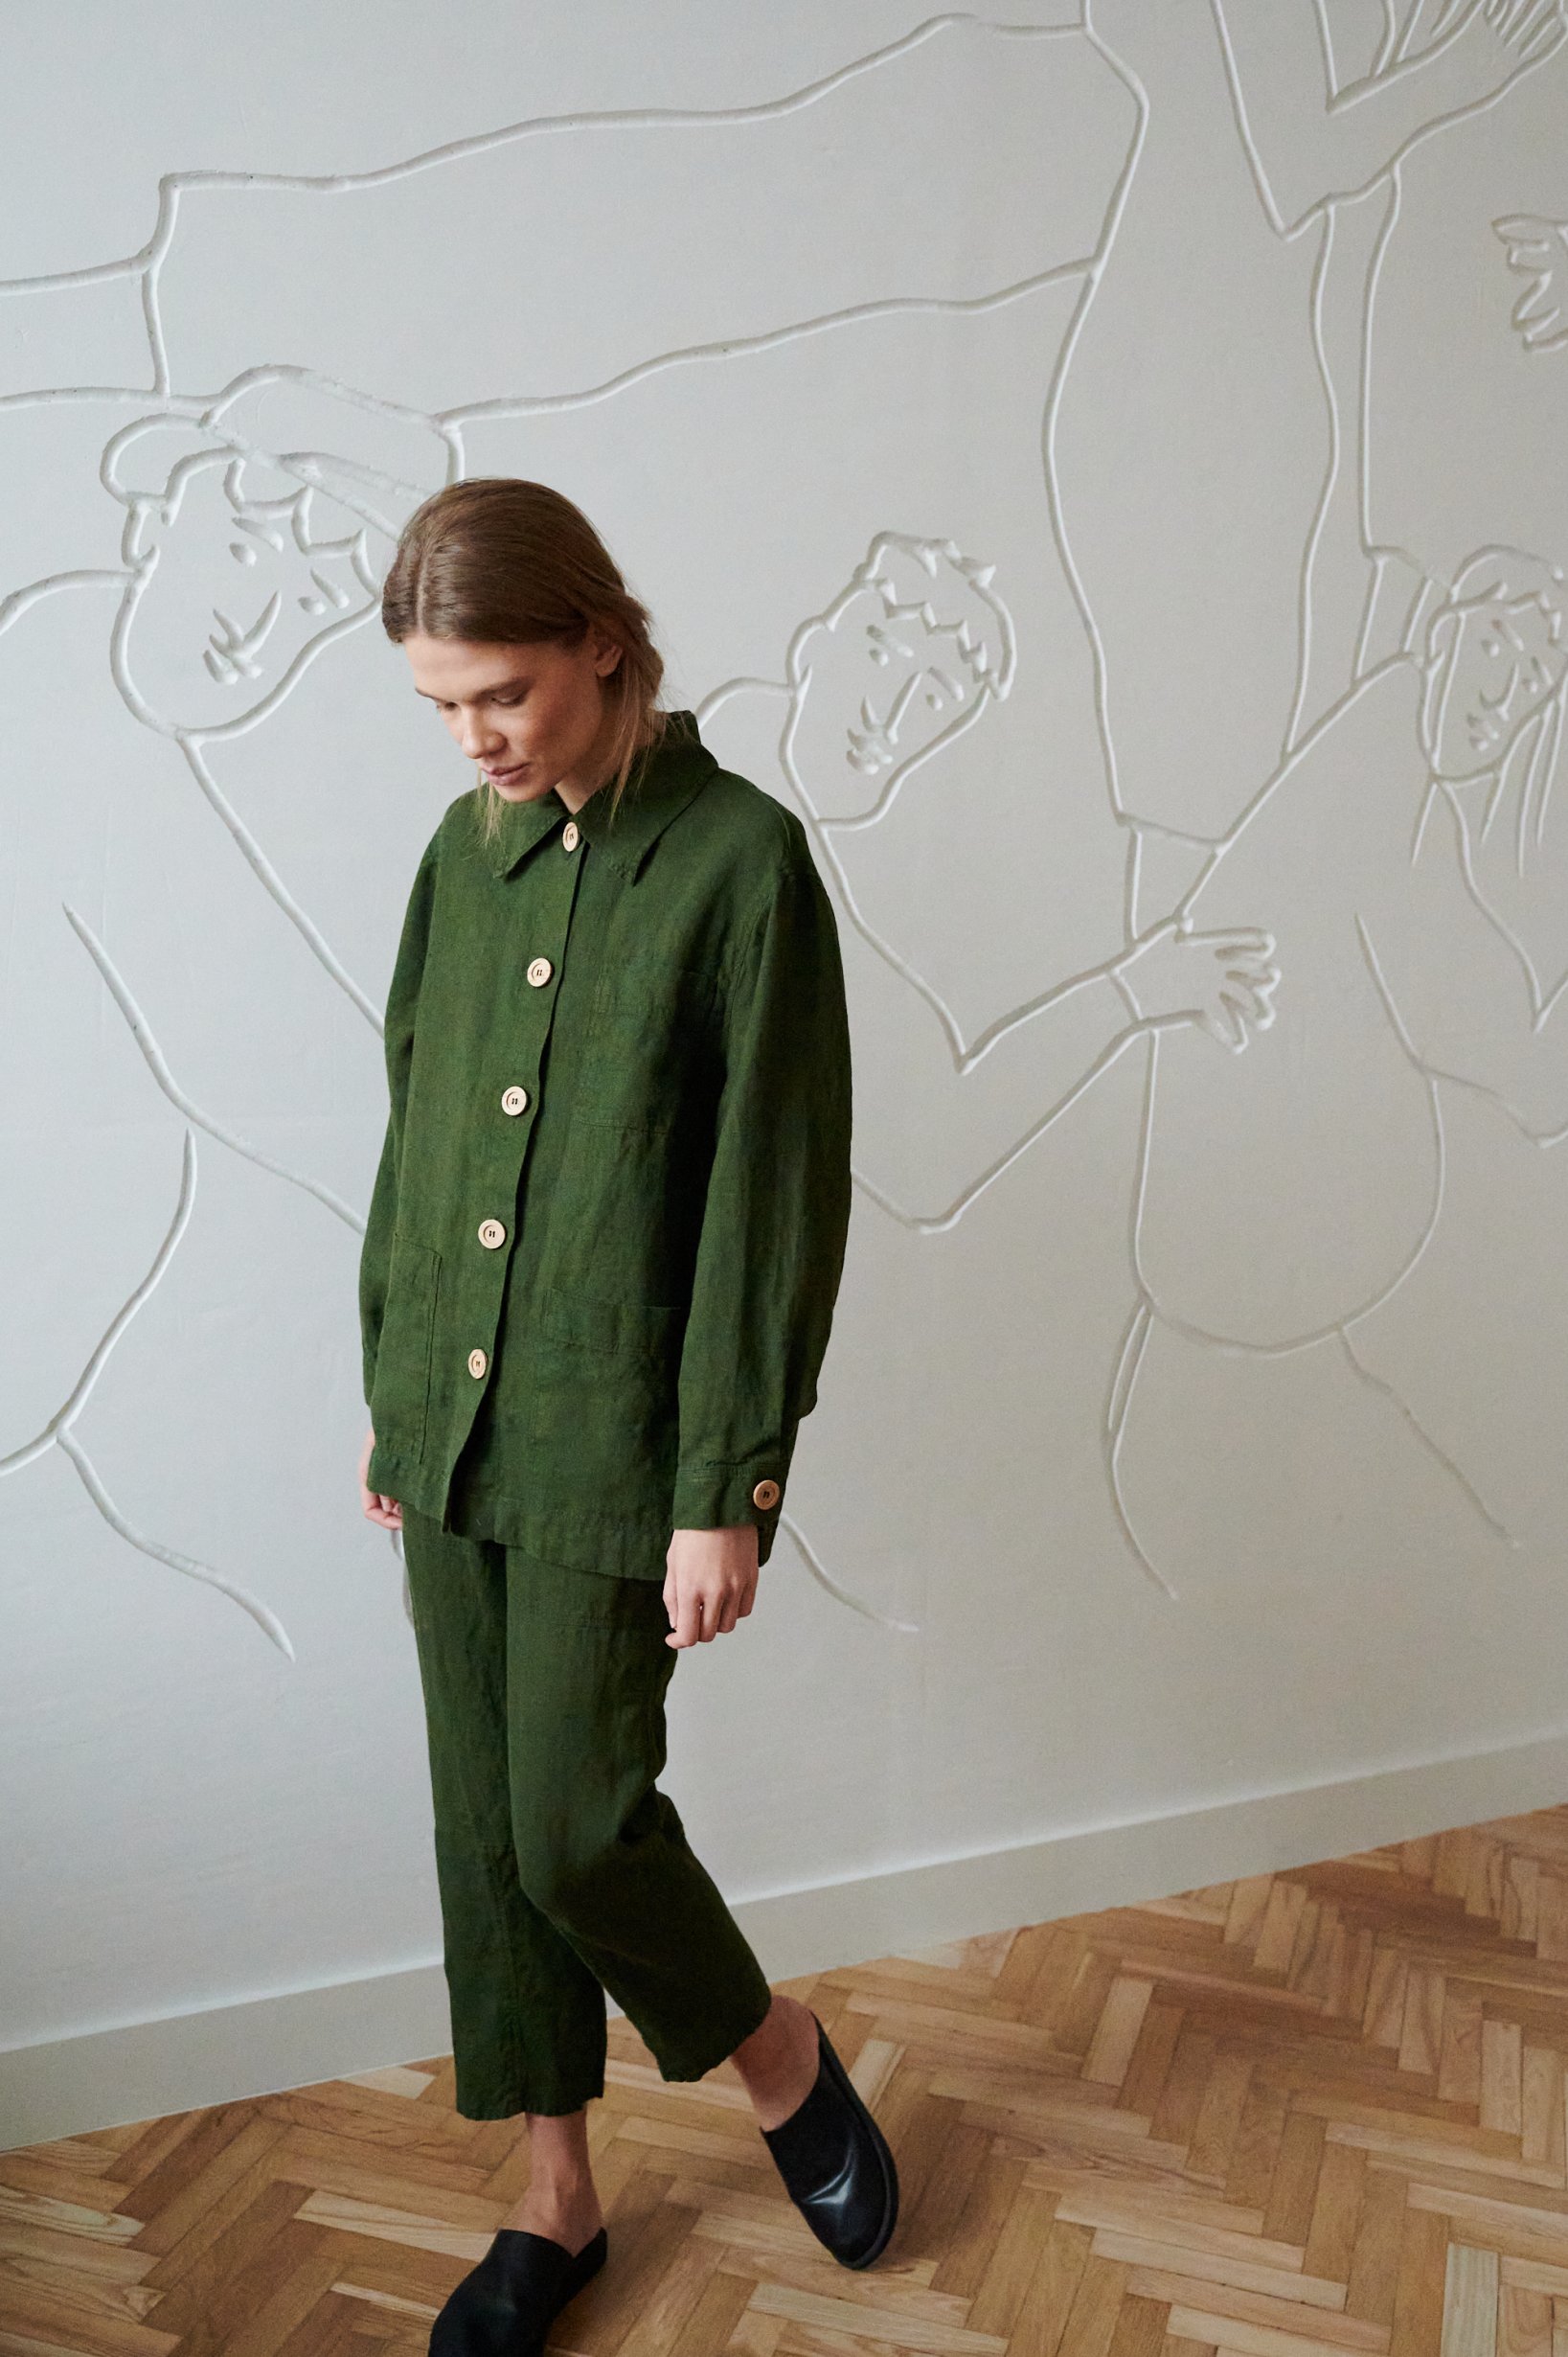 Linenfox model wearing a green loose-fitting linen utility jacket and matching linen trousers outfit